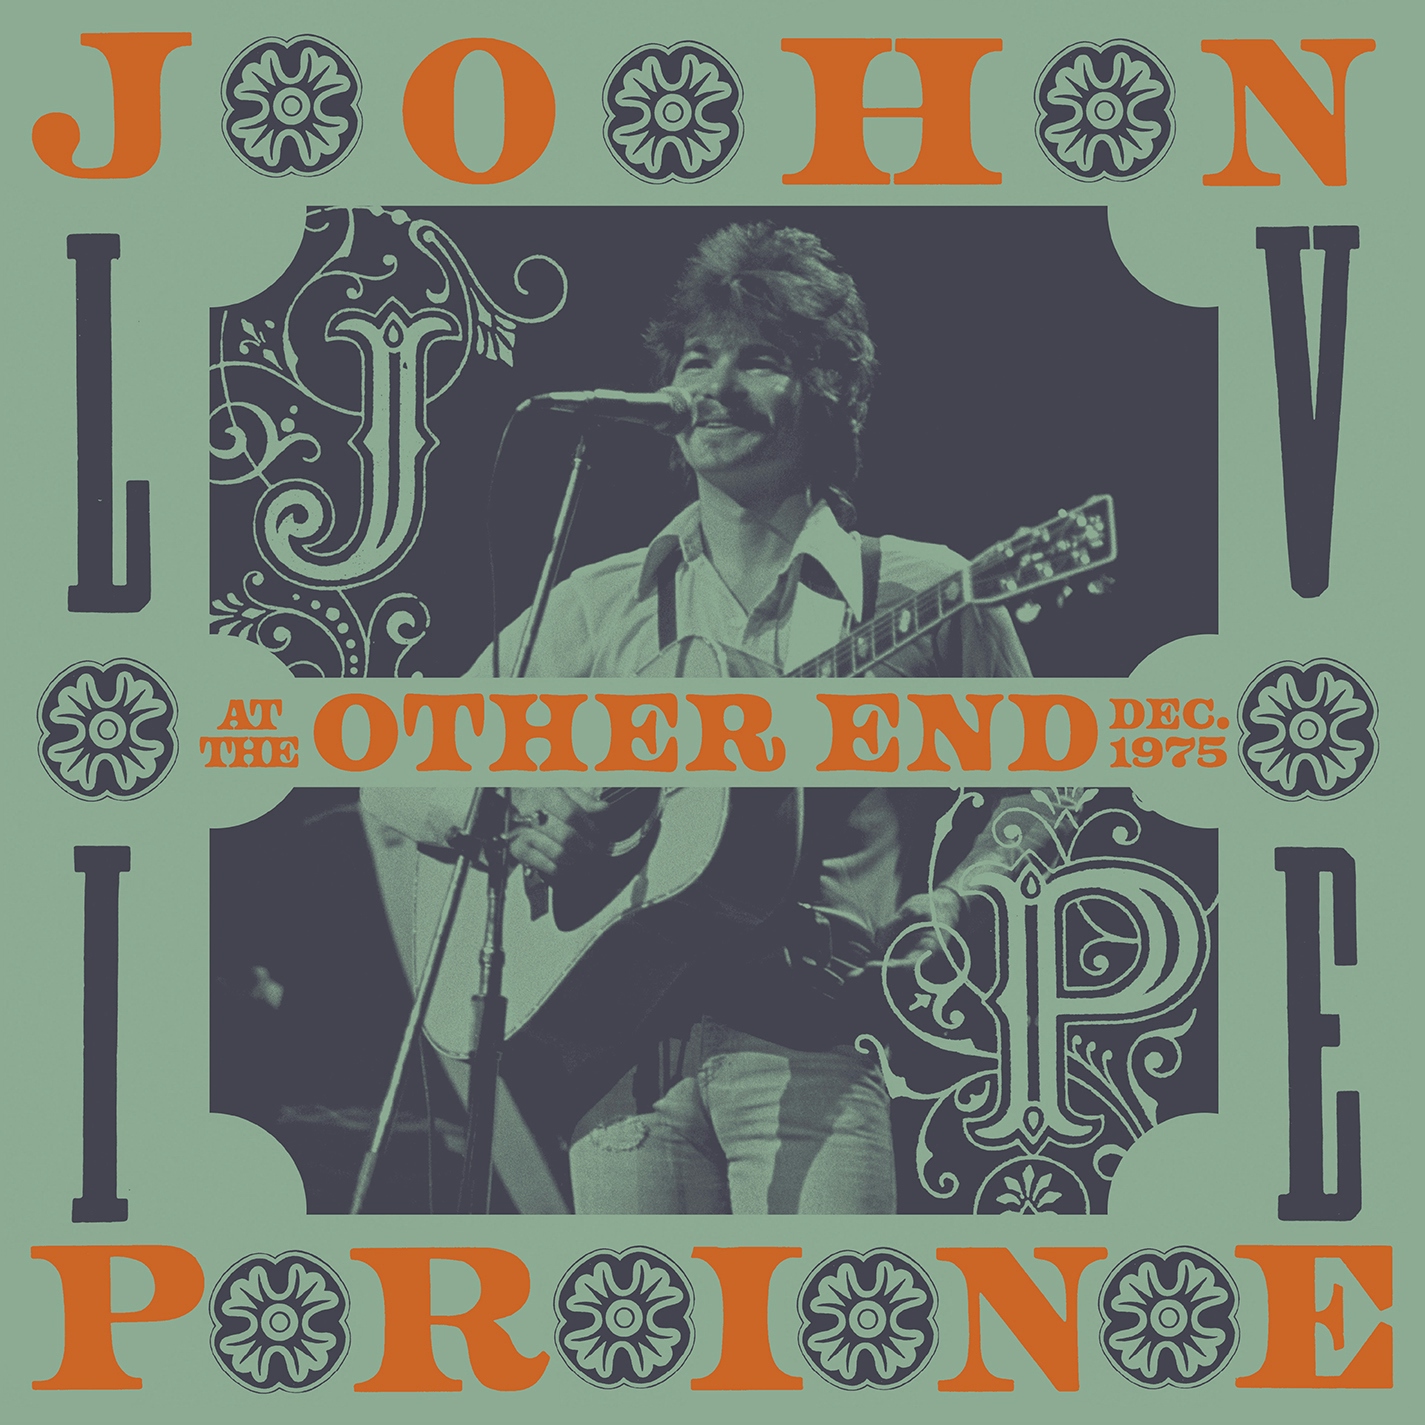 Album artwork for Album artwork for Live At The Other End, December 1975 by John Prine by Live At The Other End, December 1975 - John Prine